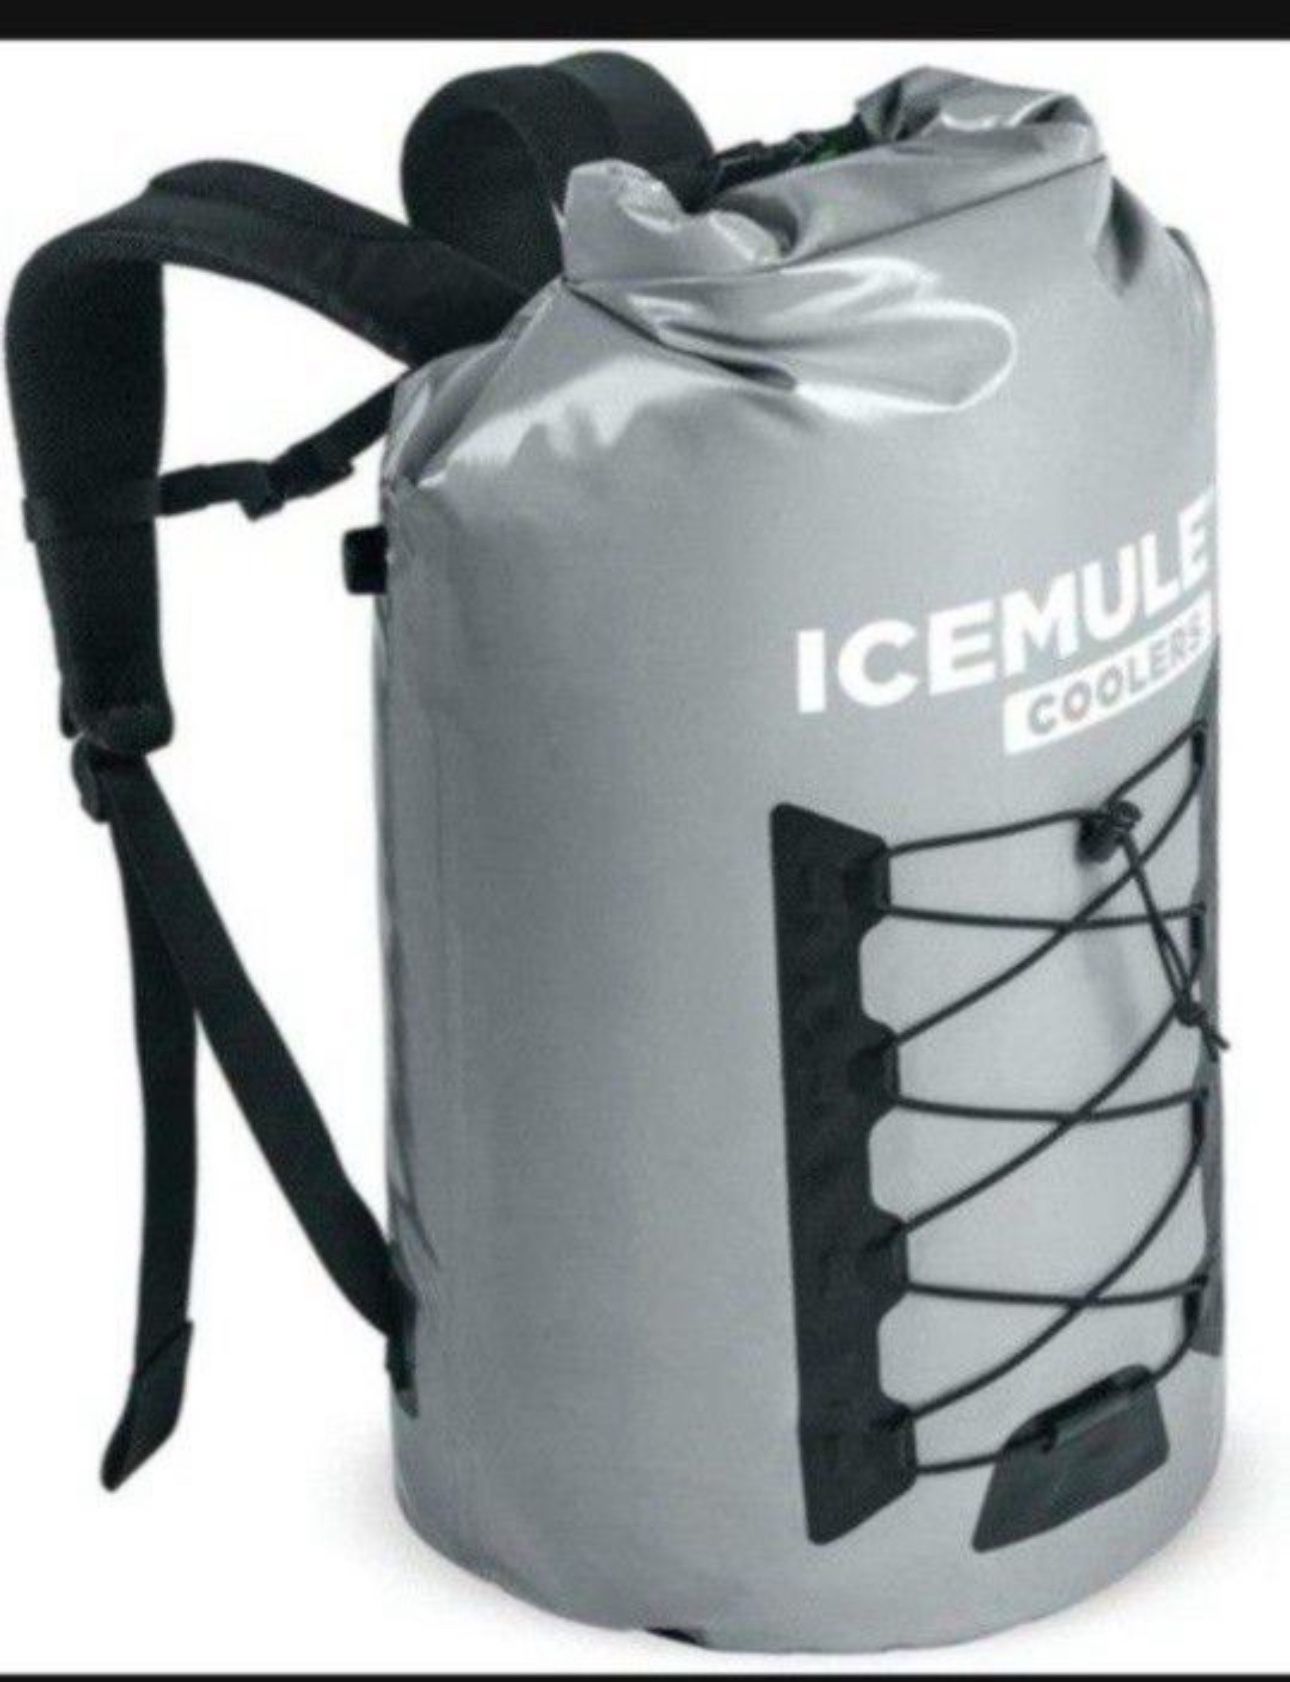 ICEMULE Pro Collapsible Backpack Cooler – Hands Free, 100% Waterproof, 24+ Hours Cooling, Soft Sided Cooler